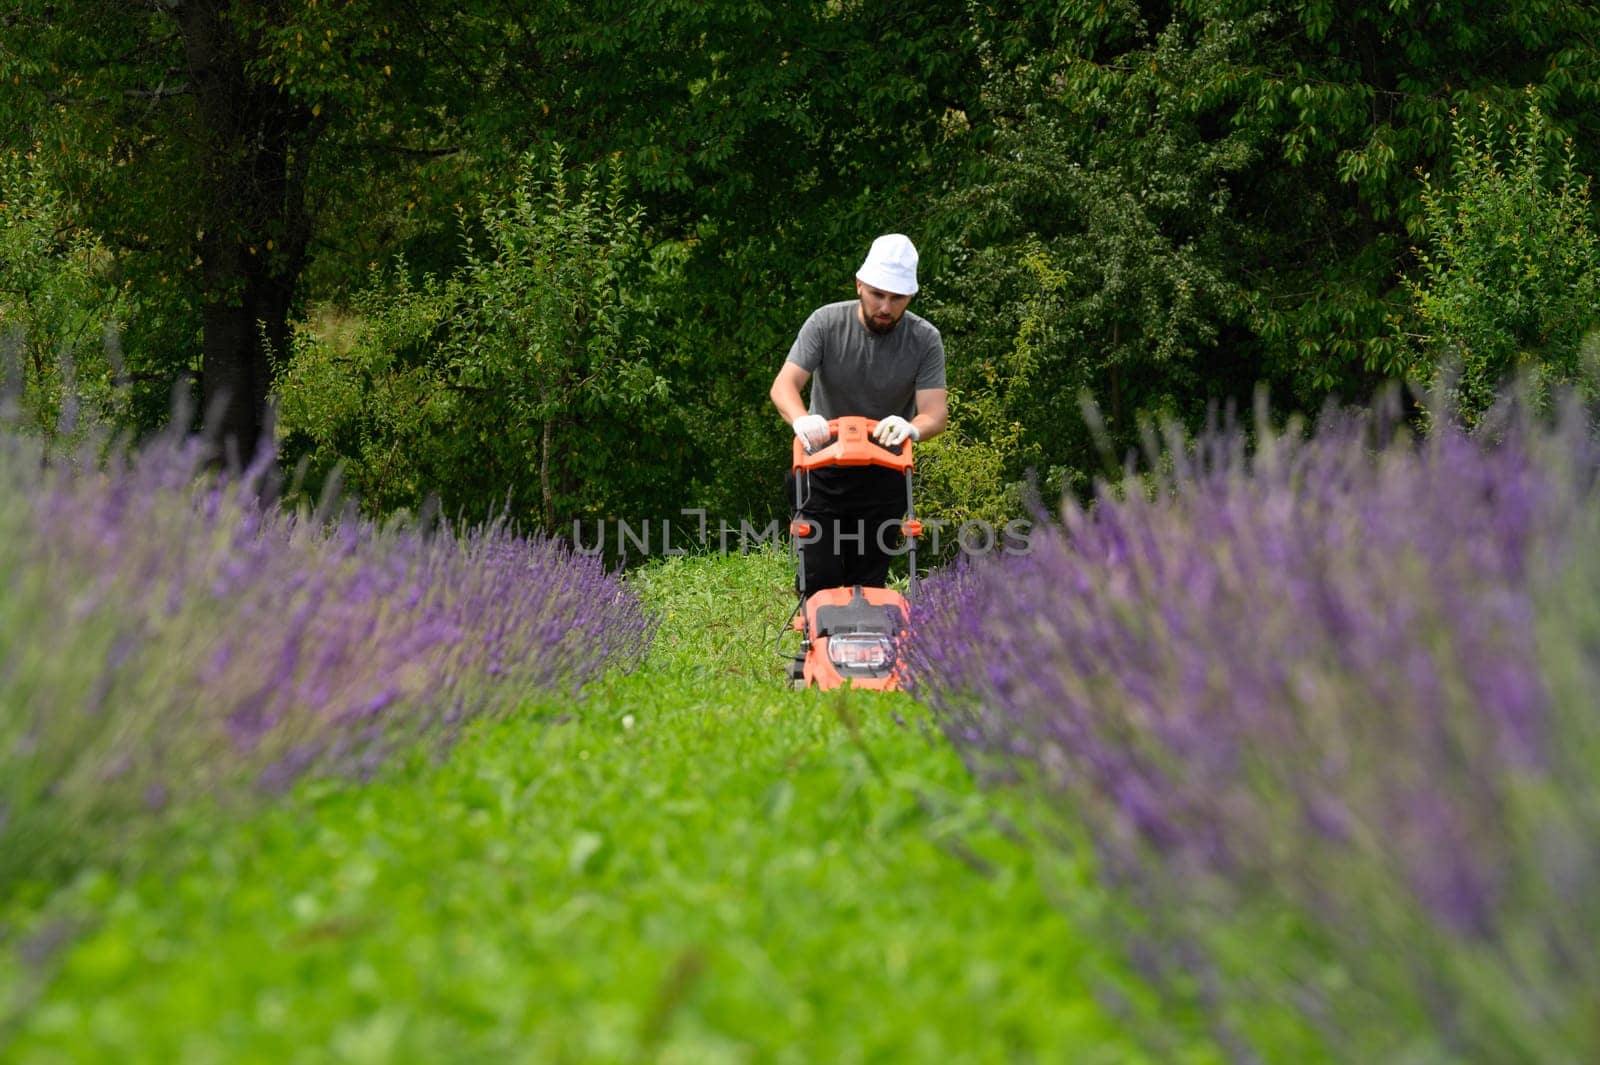 Working in the garden with a lawnmower, the gardener mows the grass between the lavender bushes. by Niko_Cingaryuk